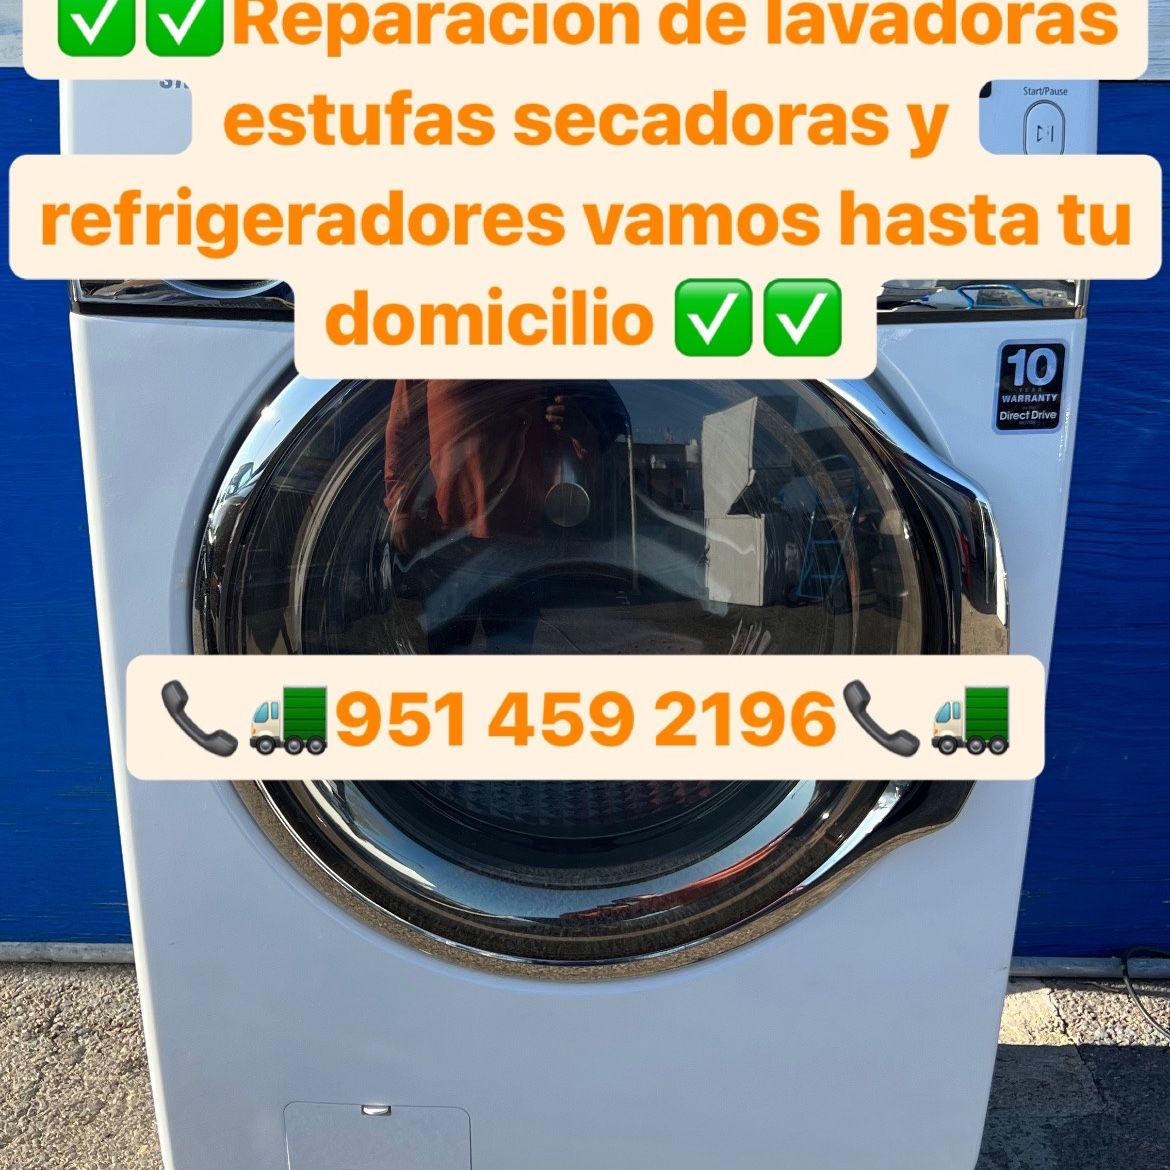 Repair Of Washing Machines, Dryers, Refrigerators And Stoves